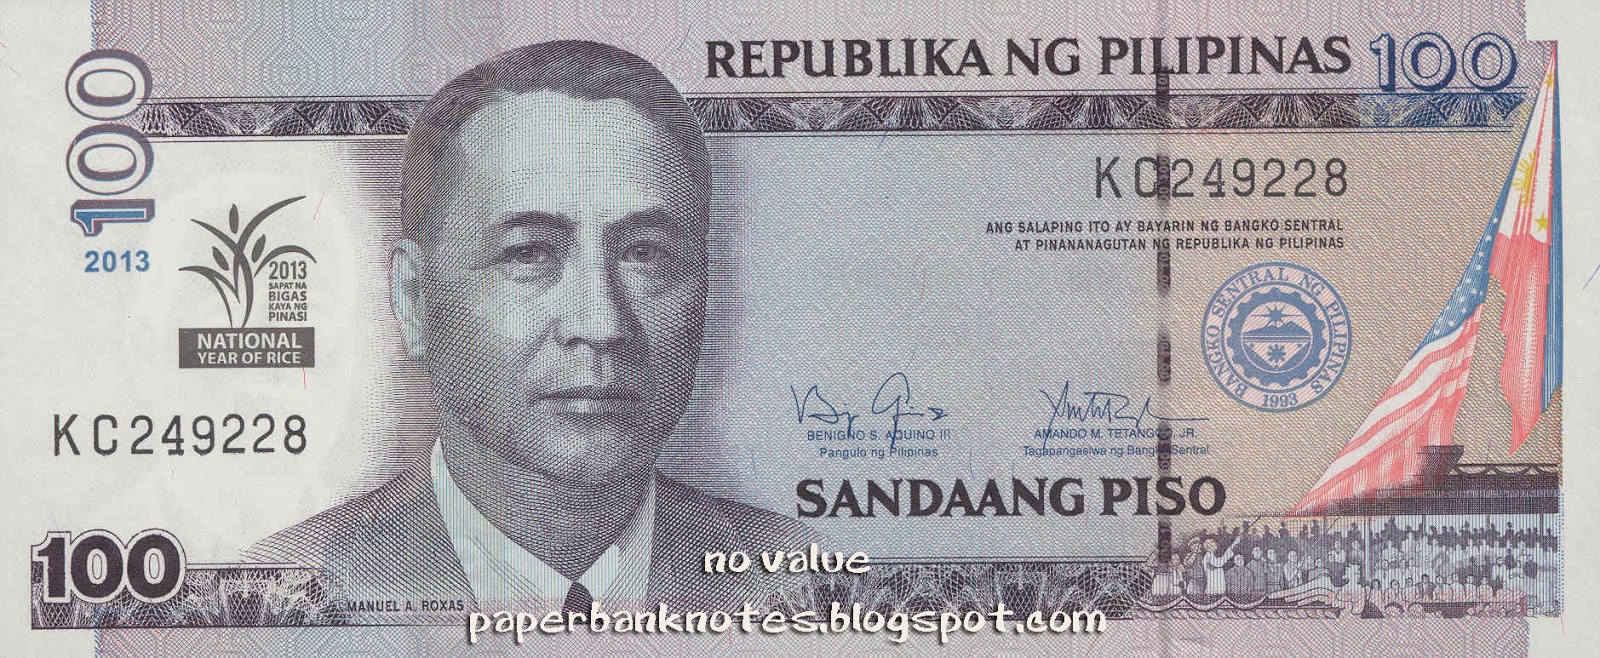 http://seabanknotes.blogspot.com/2014/06/philippines-2013-100-piso-national-year.html